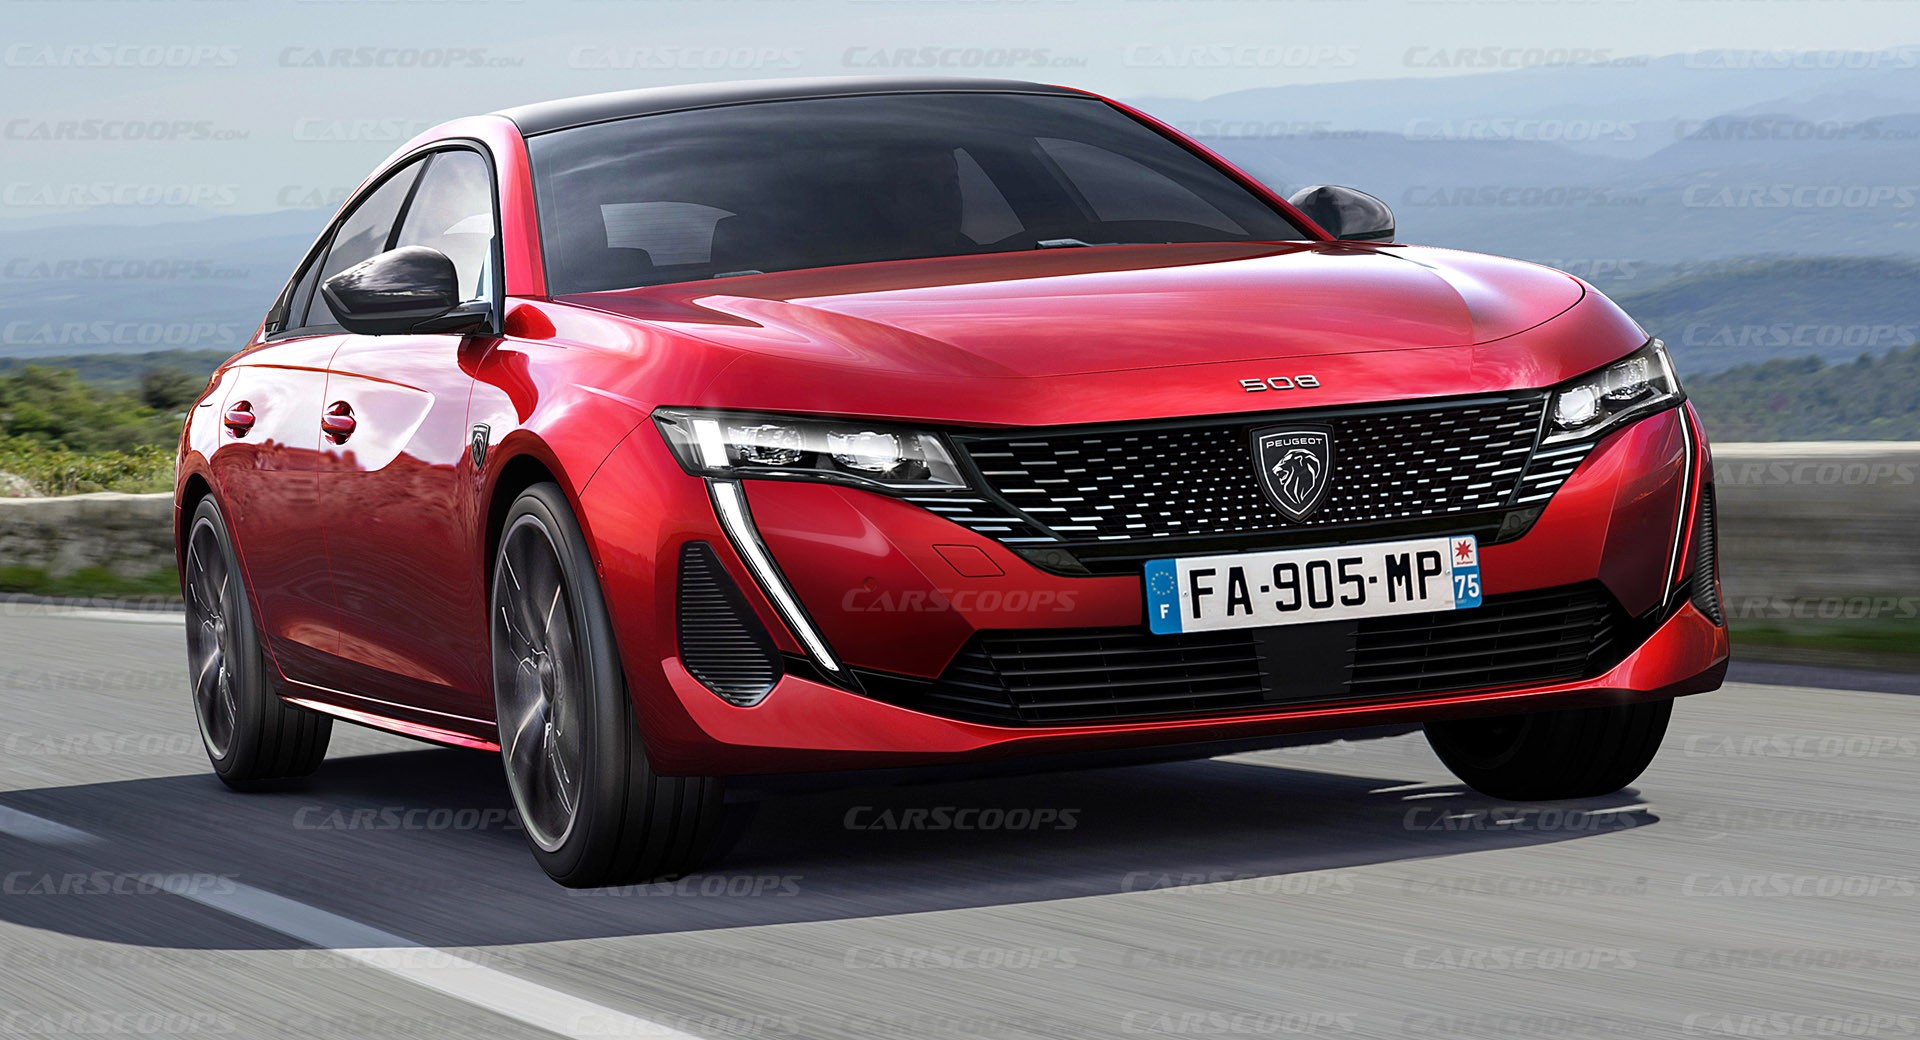 Pricing announced for 2022 Peugeot 508